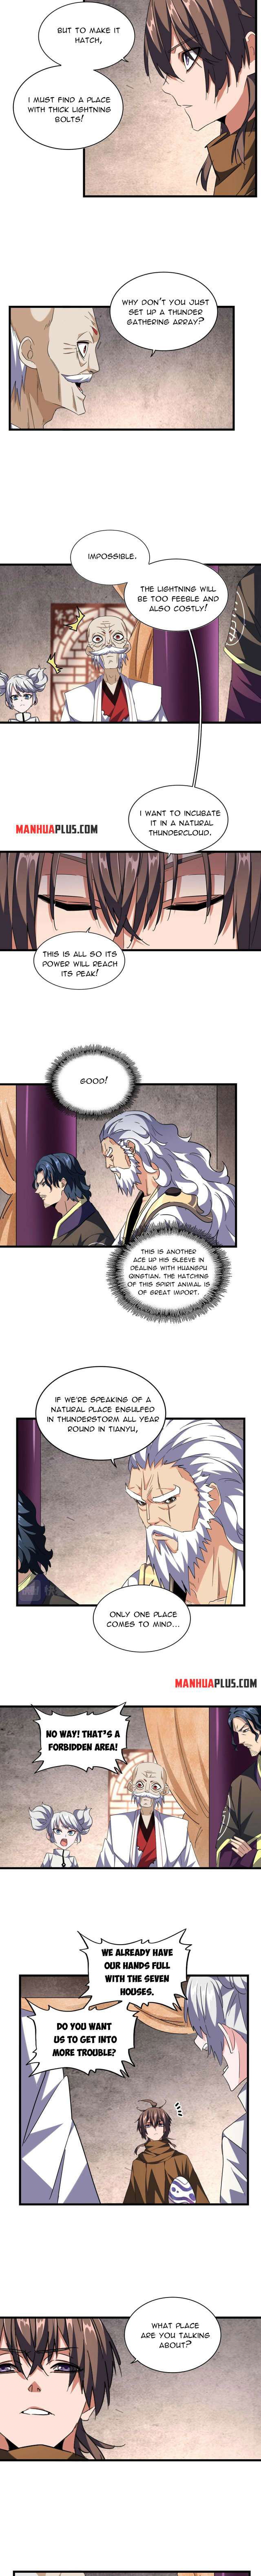 Magic Emperor Chapter 261 page 2